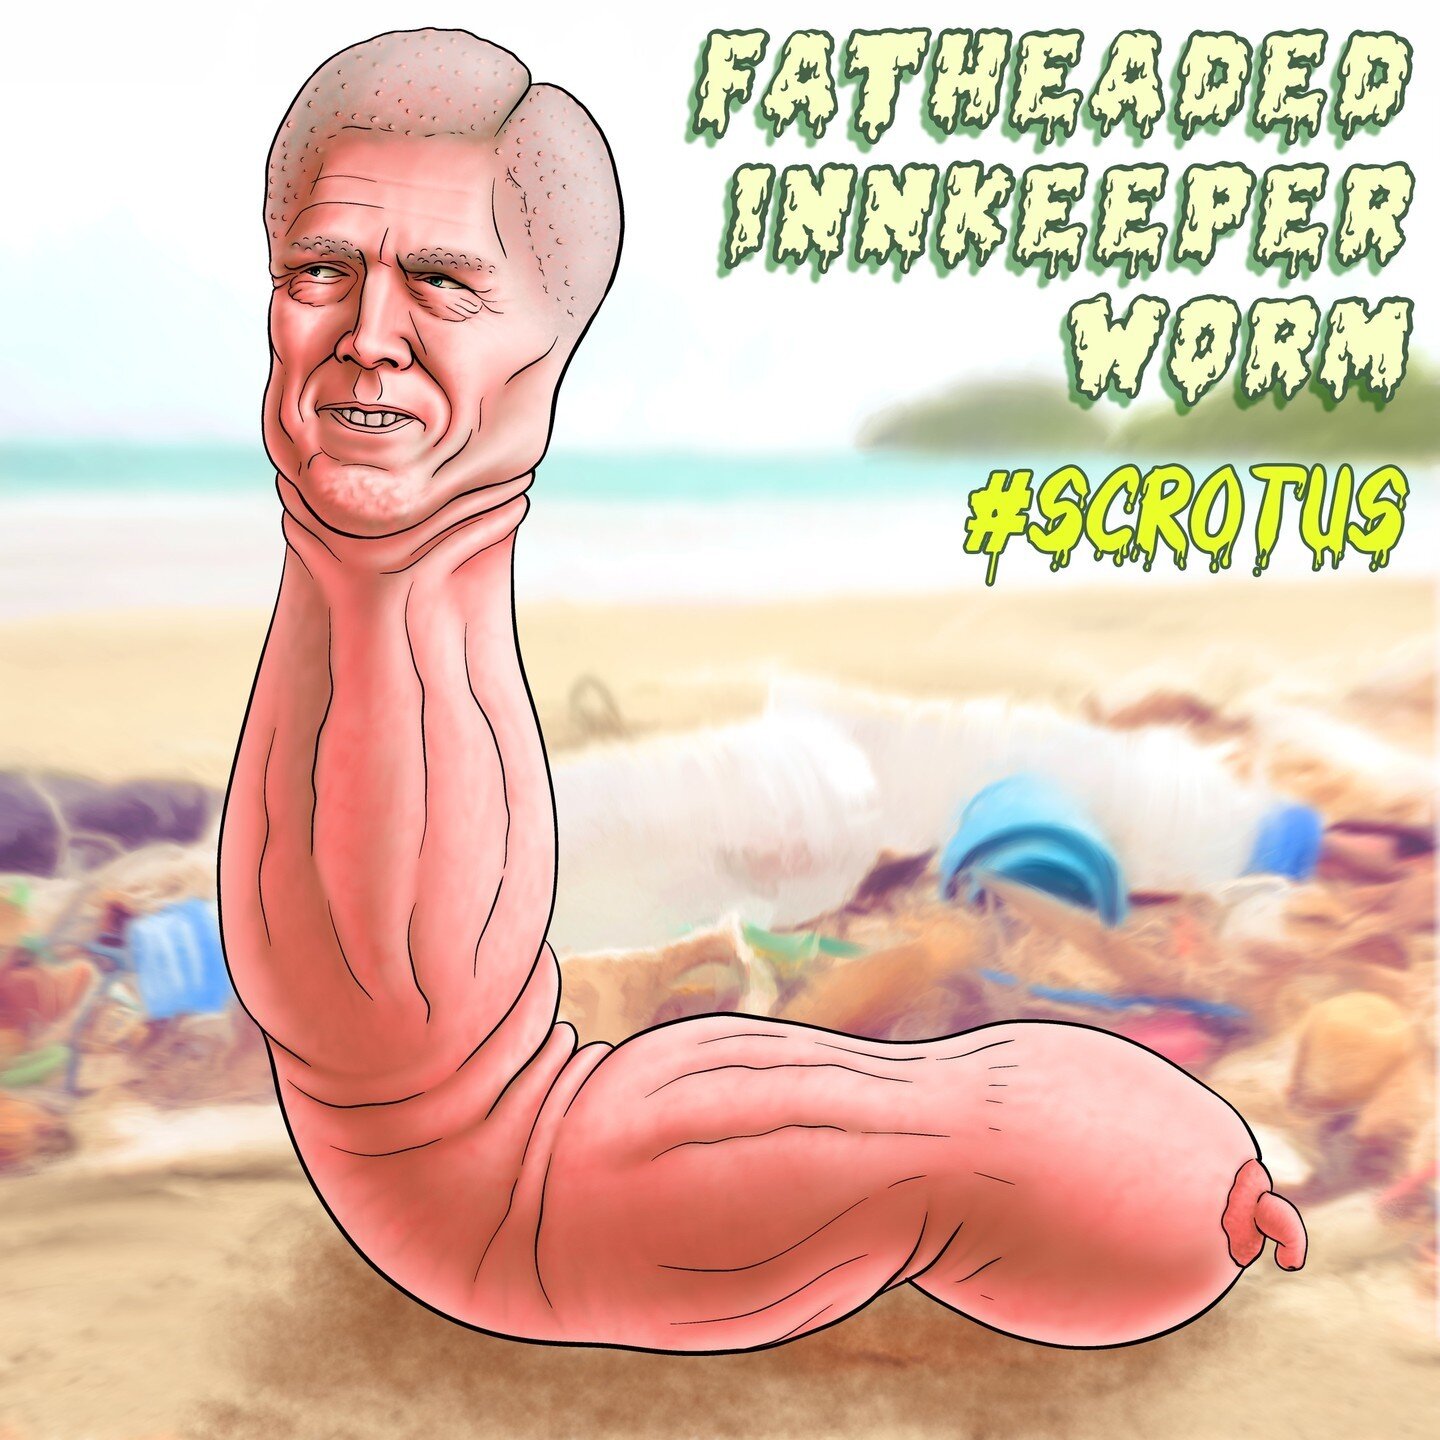 #SCROTUS Part 2! ⁠
&quot;Fat innkeeper Worms&quot; are a real thing. They're disgusting so you should obviously google them right now.⁠
⁠
This creature on the other hand is a &quot;Fat-Headed Innkeeper Worm&quot; and much more revolting. ⁠🪱🤮⁠
⁠
Alt